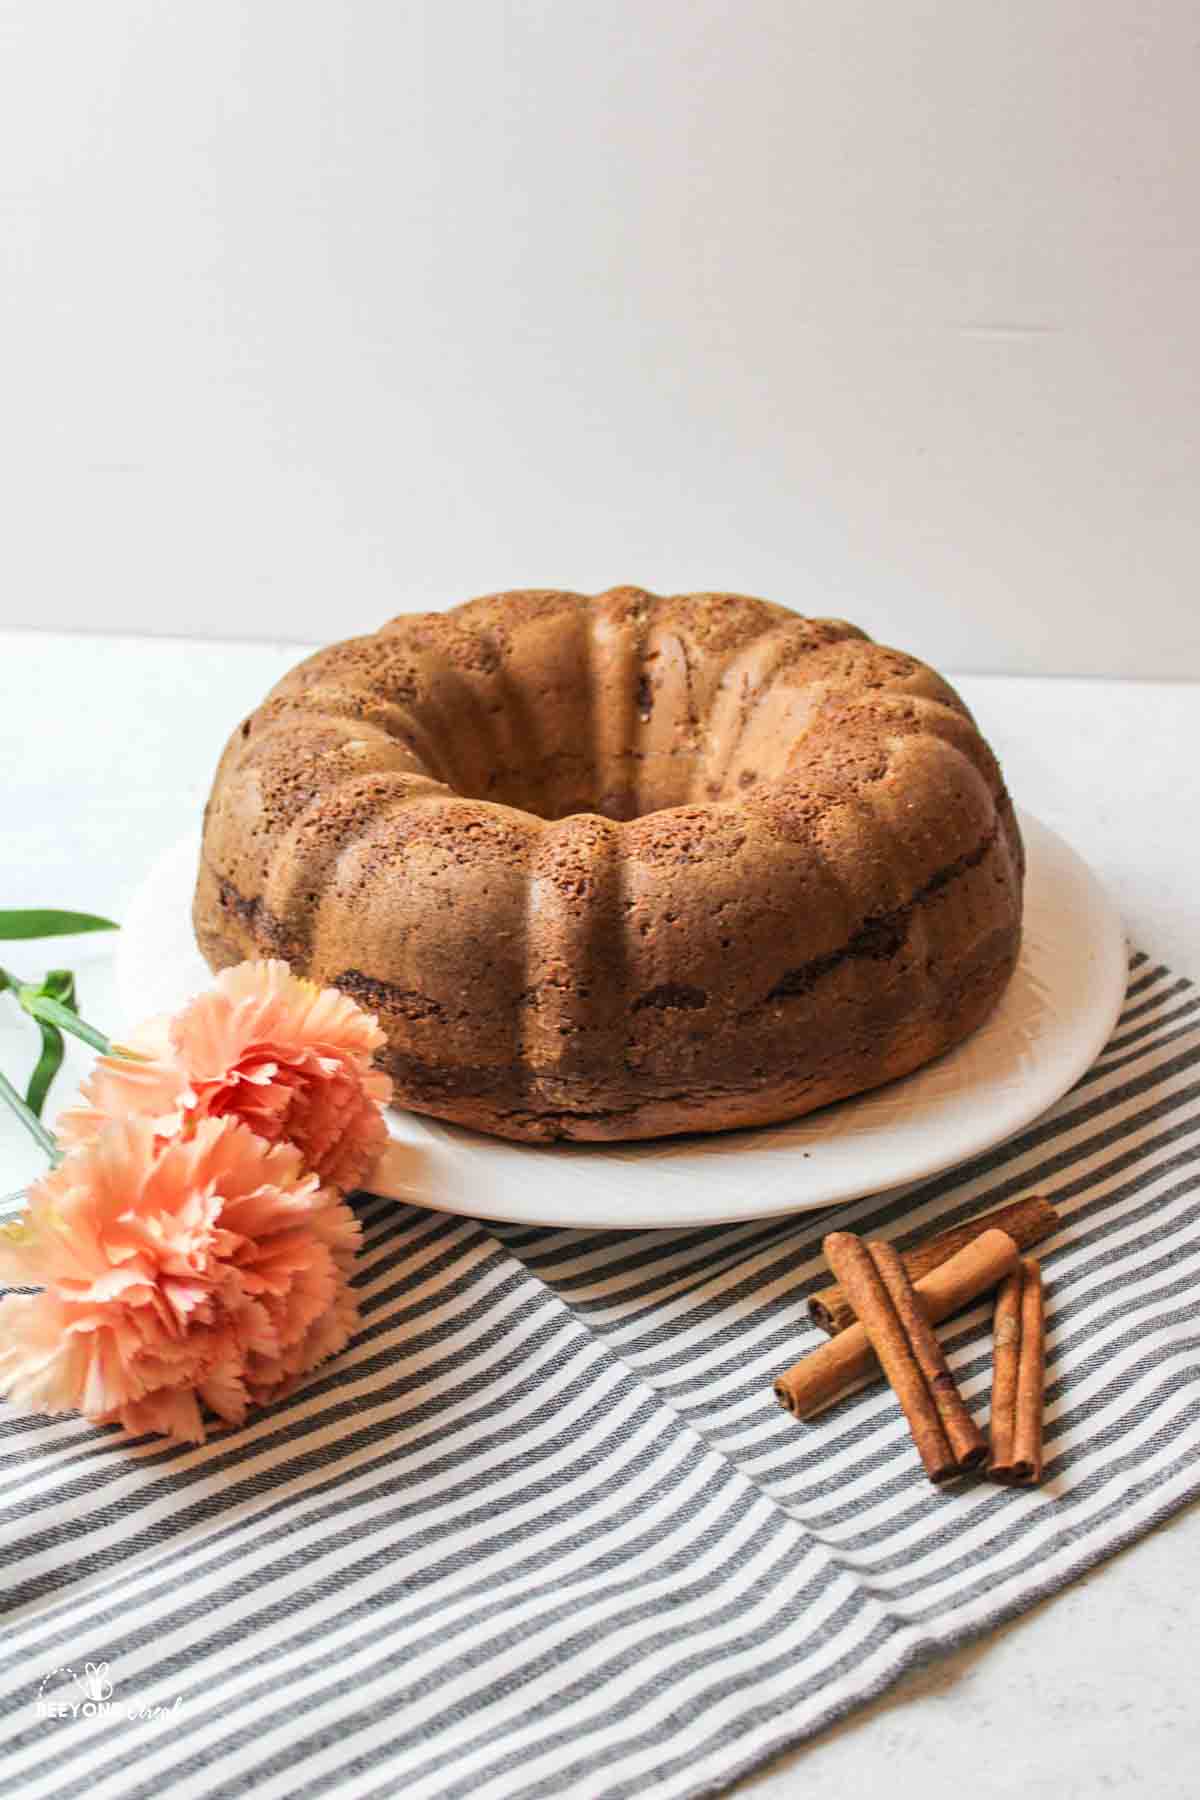 bundt coffee cake next to fresh pink flowers and a pile of cinnamon sticks